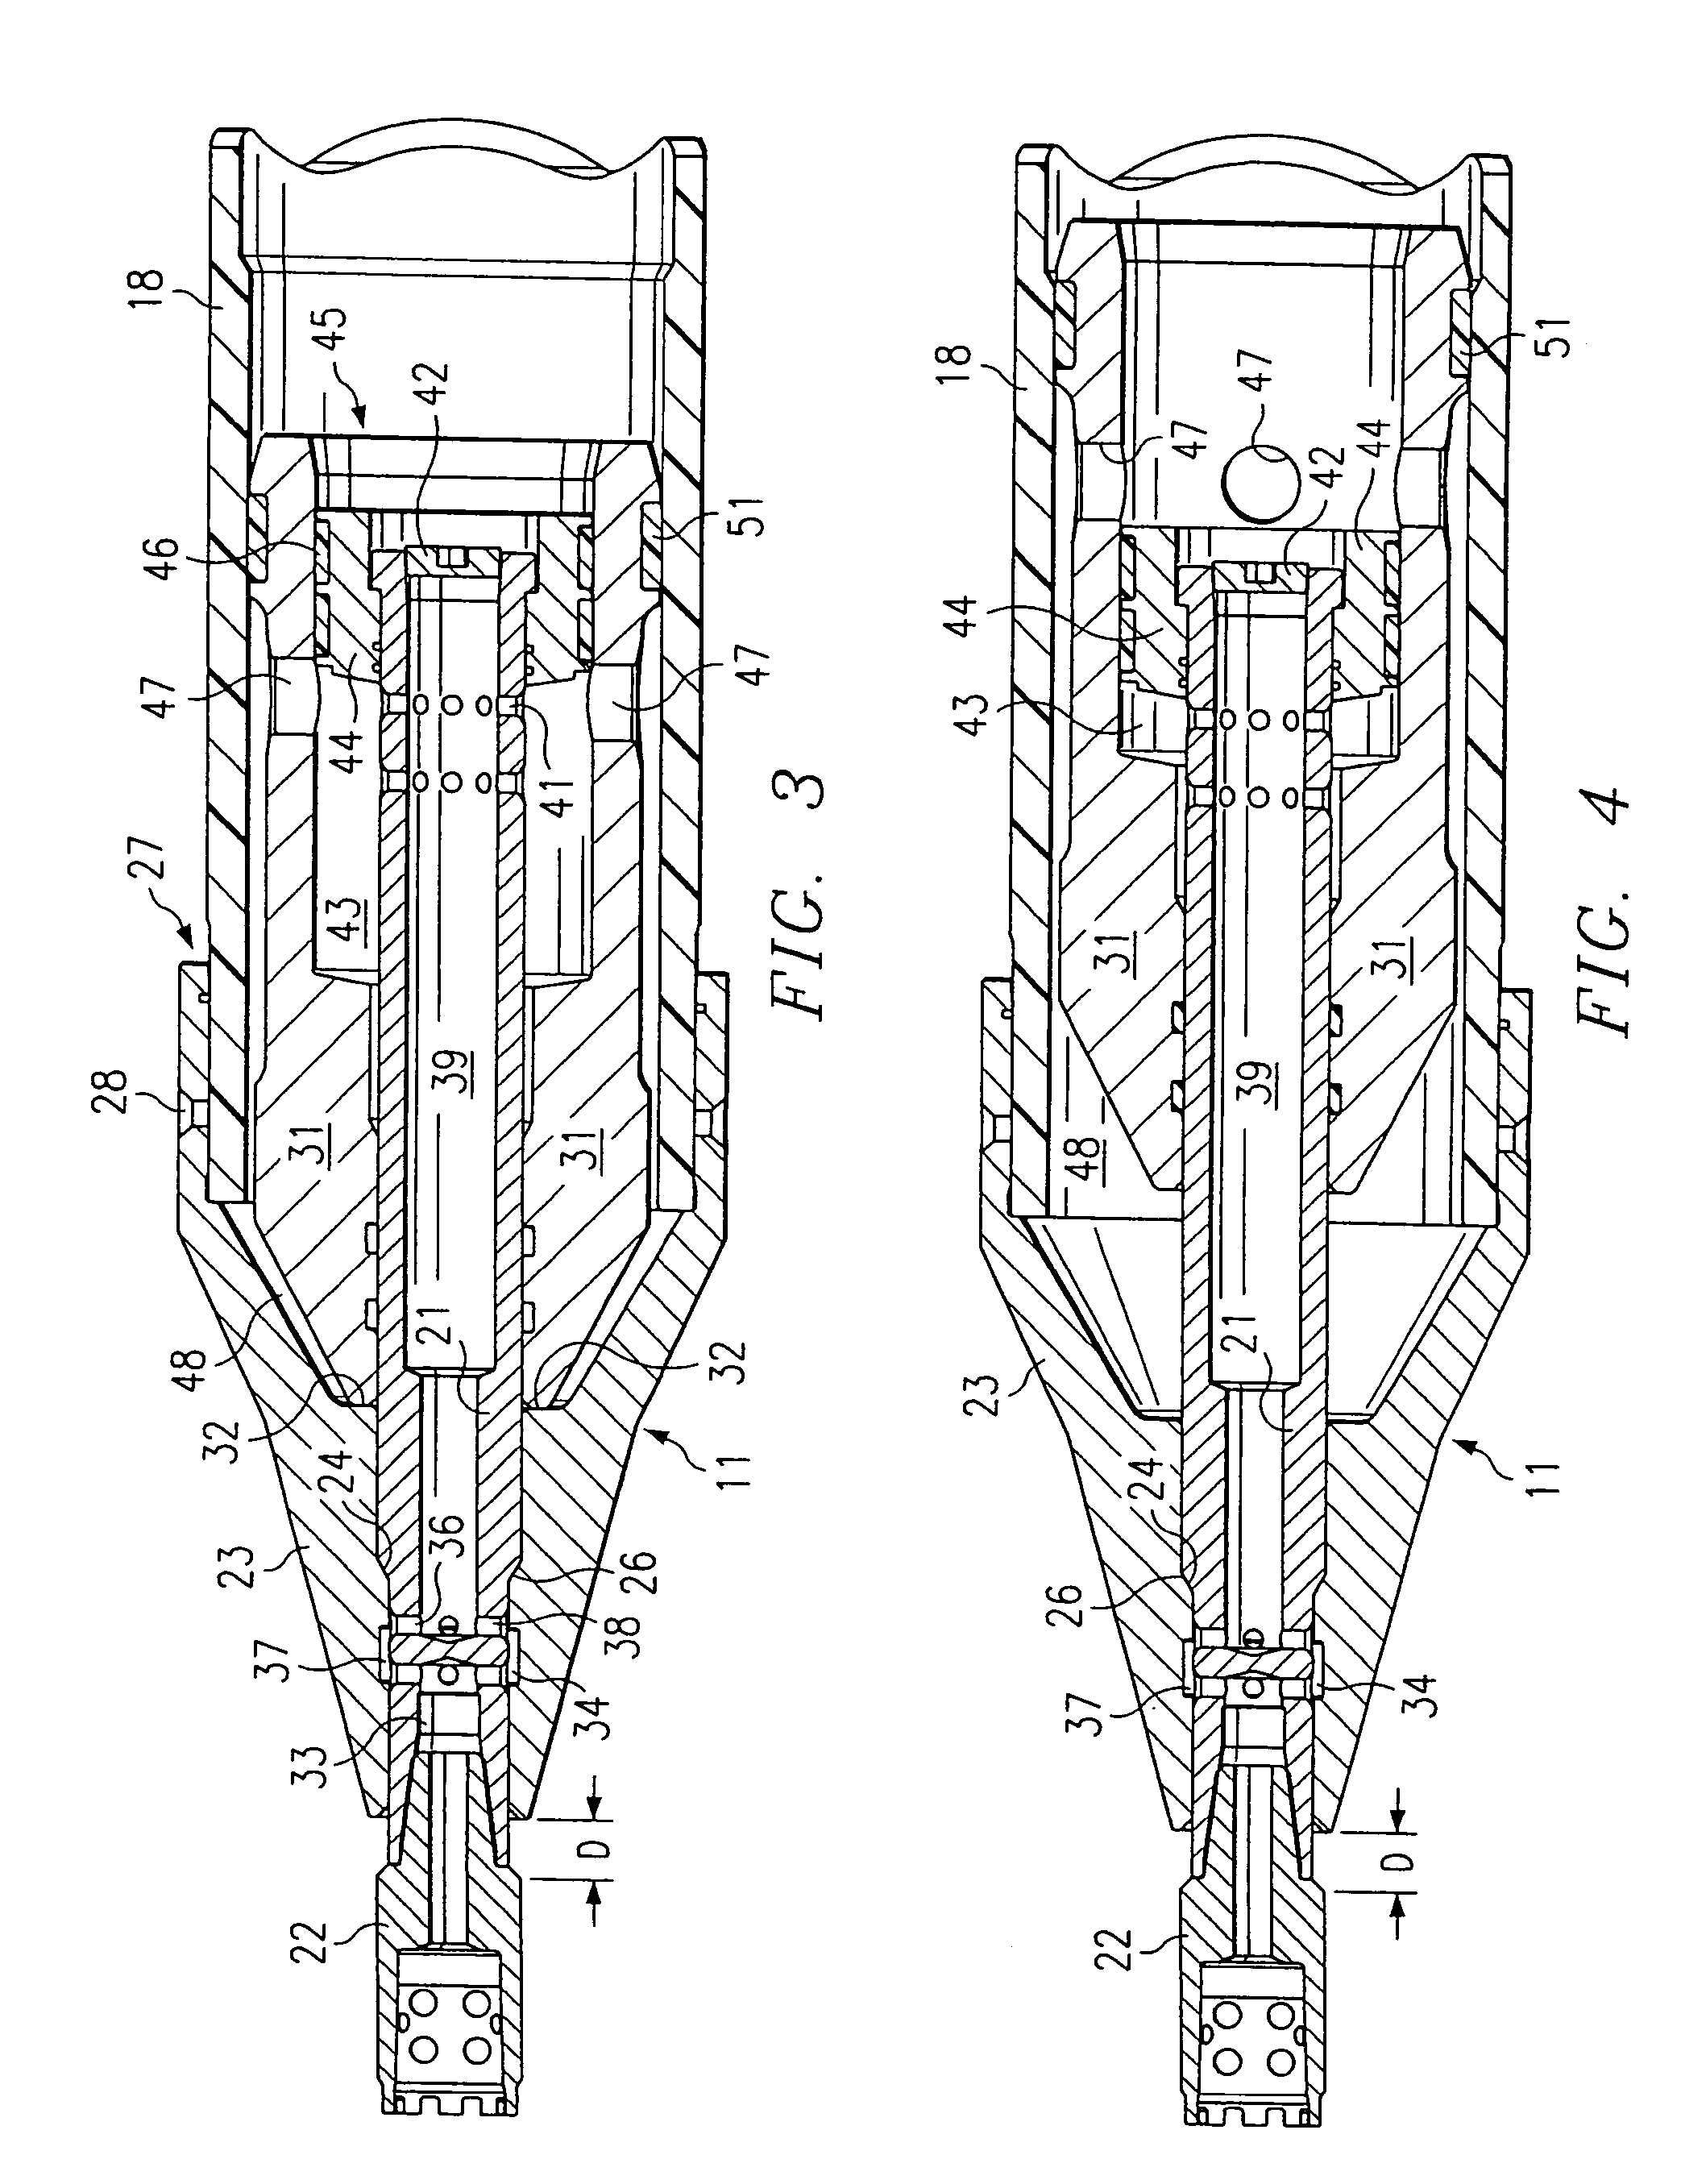 Method and apparatus for replacement of underground pipe